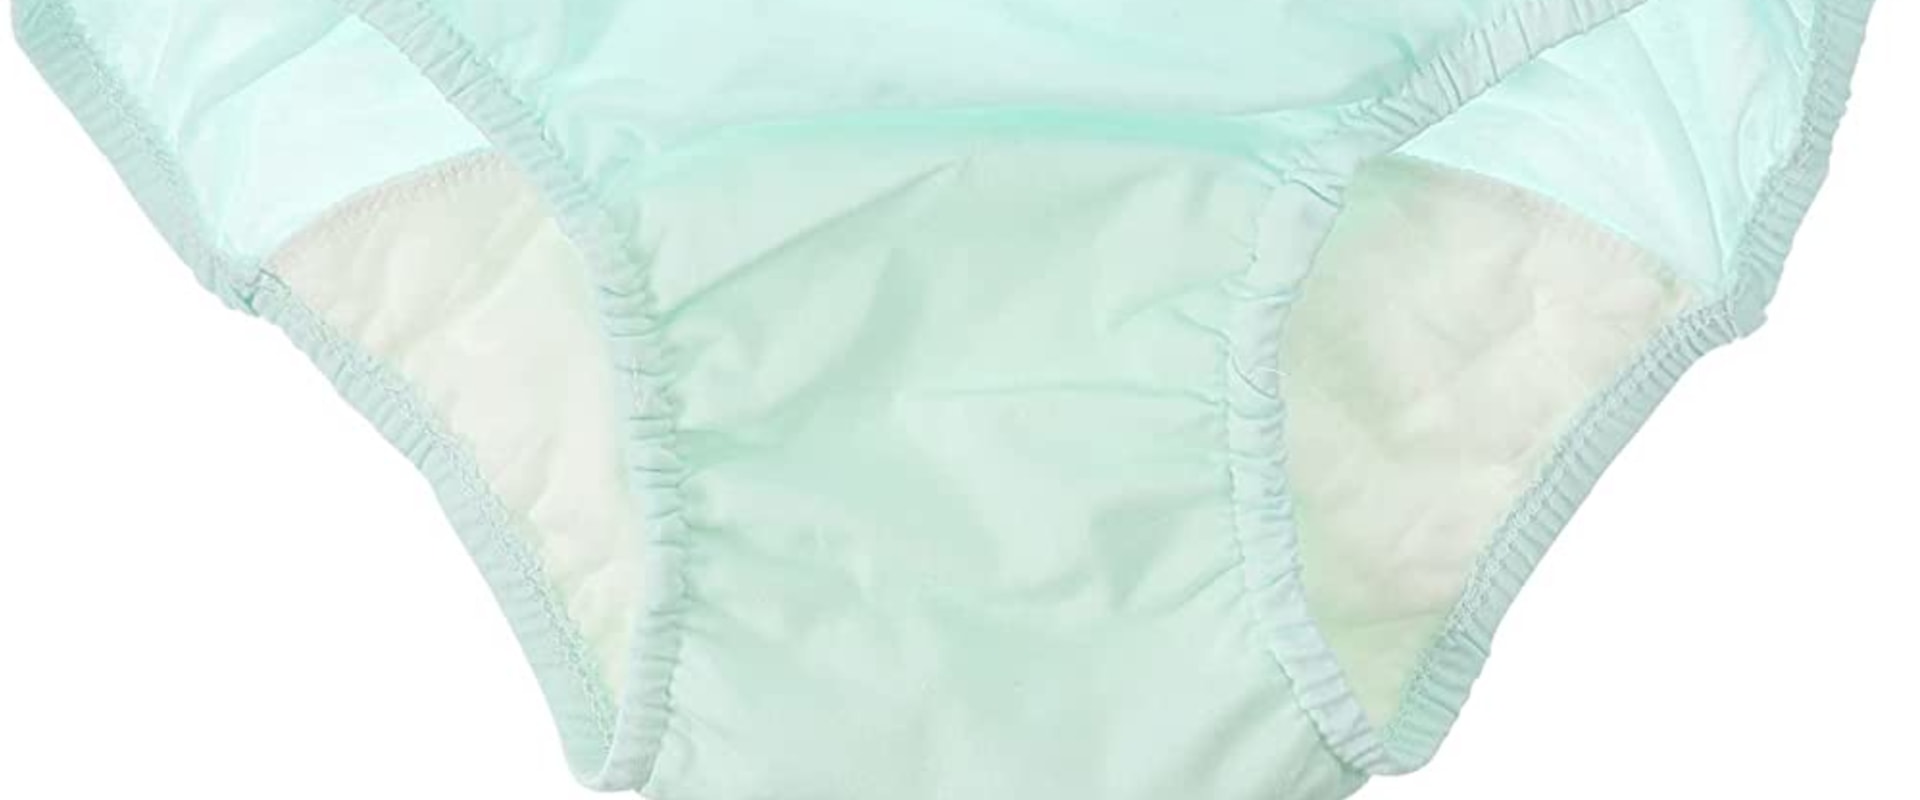 Reusable Overnight Diapers: A Complete Overview